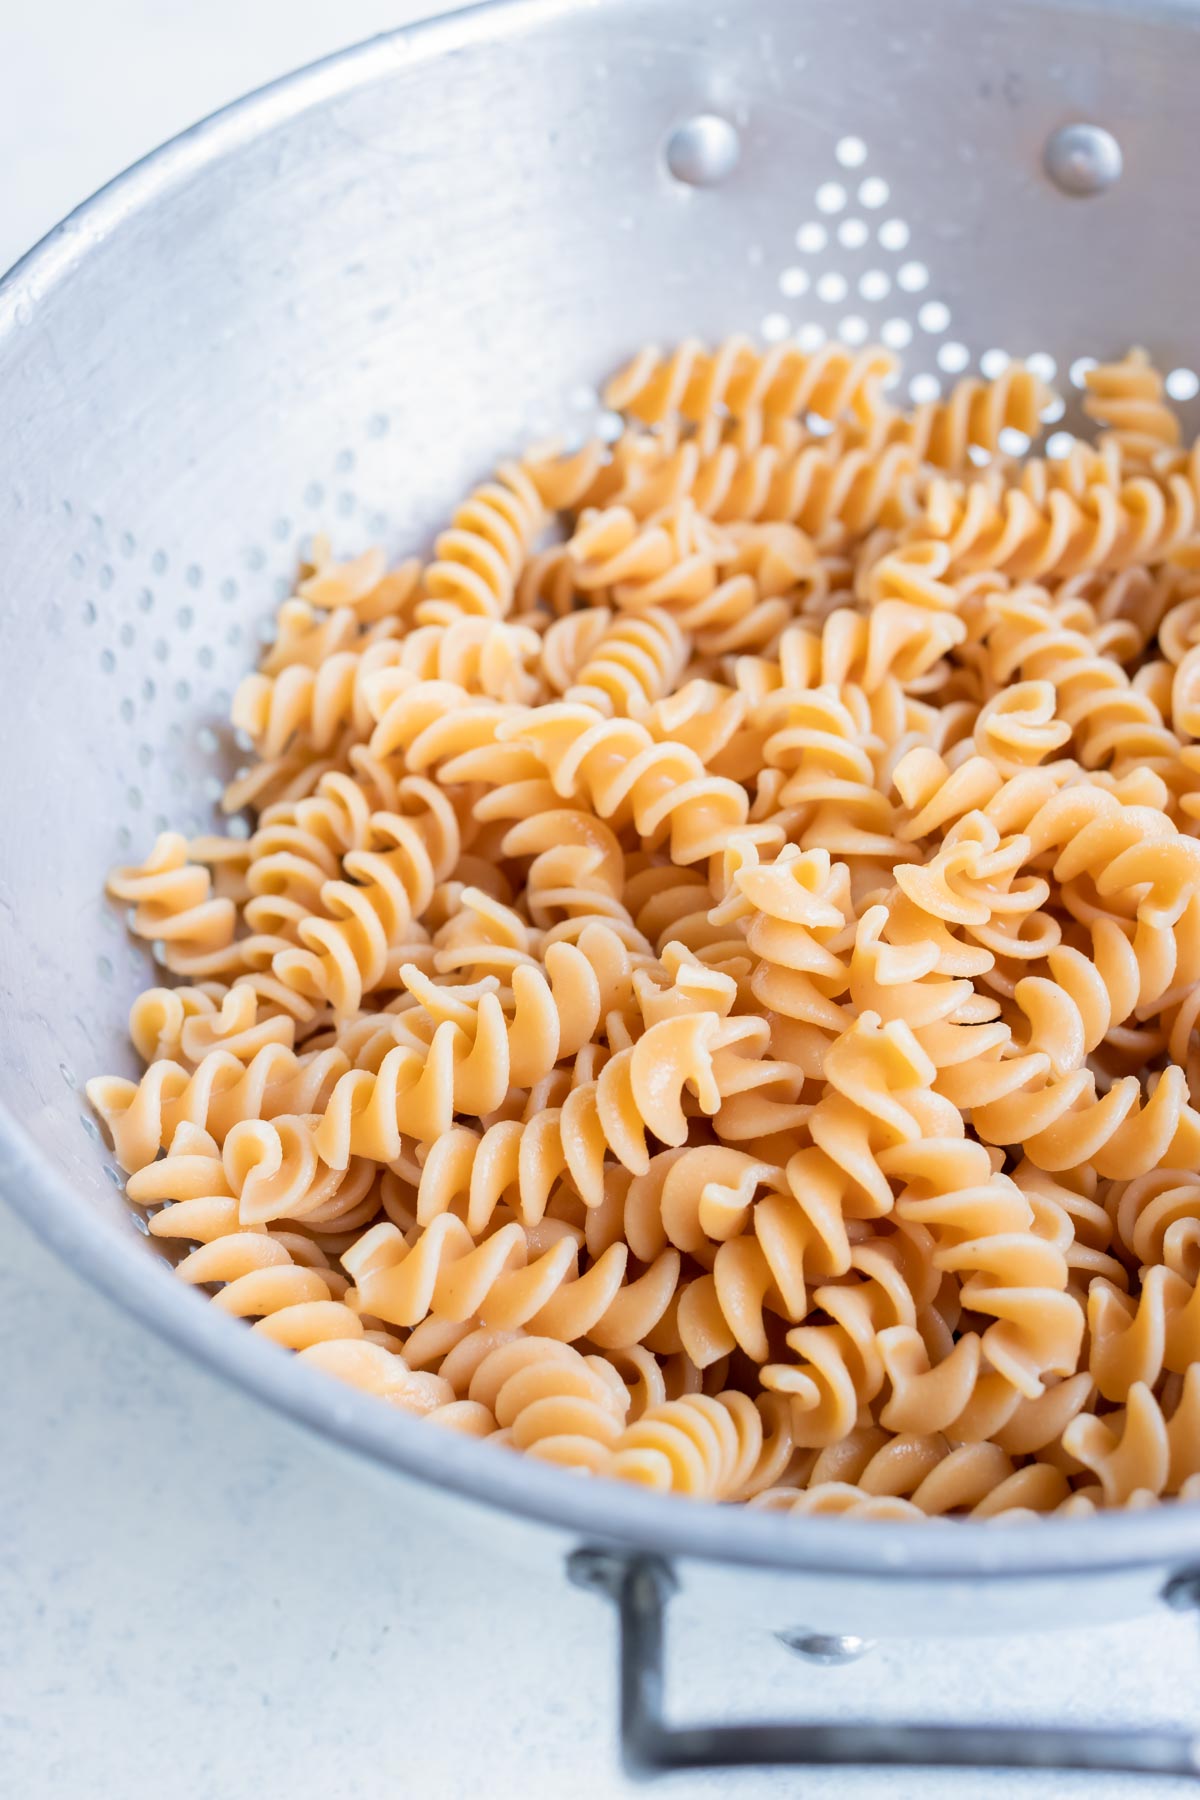 Rotini pasta is cooked and strained.